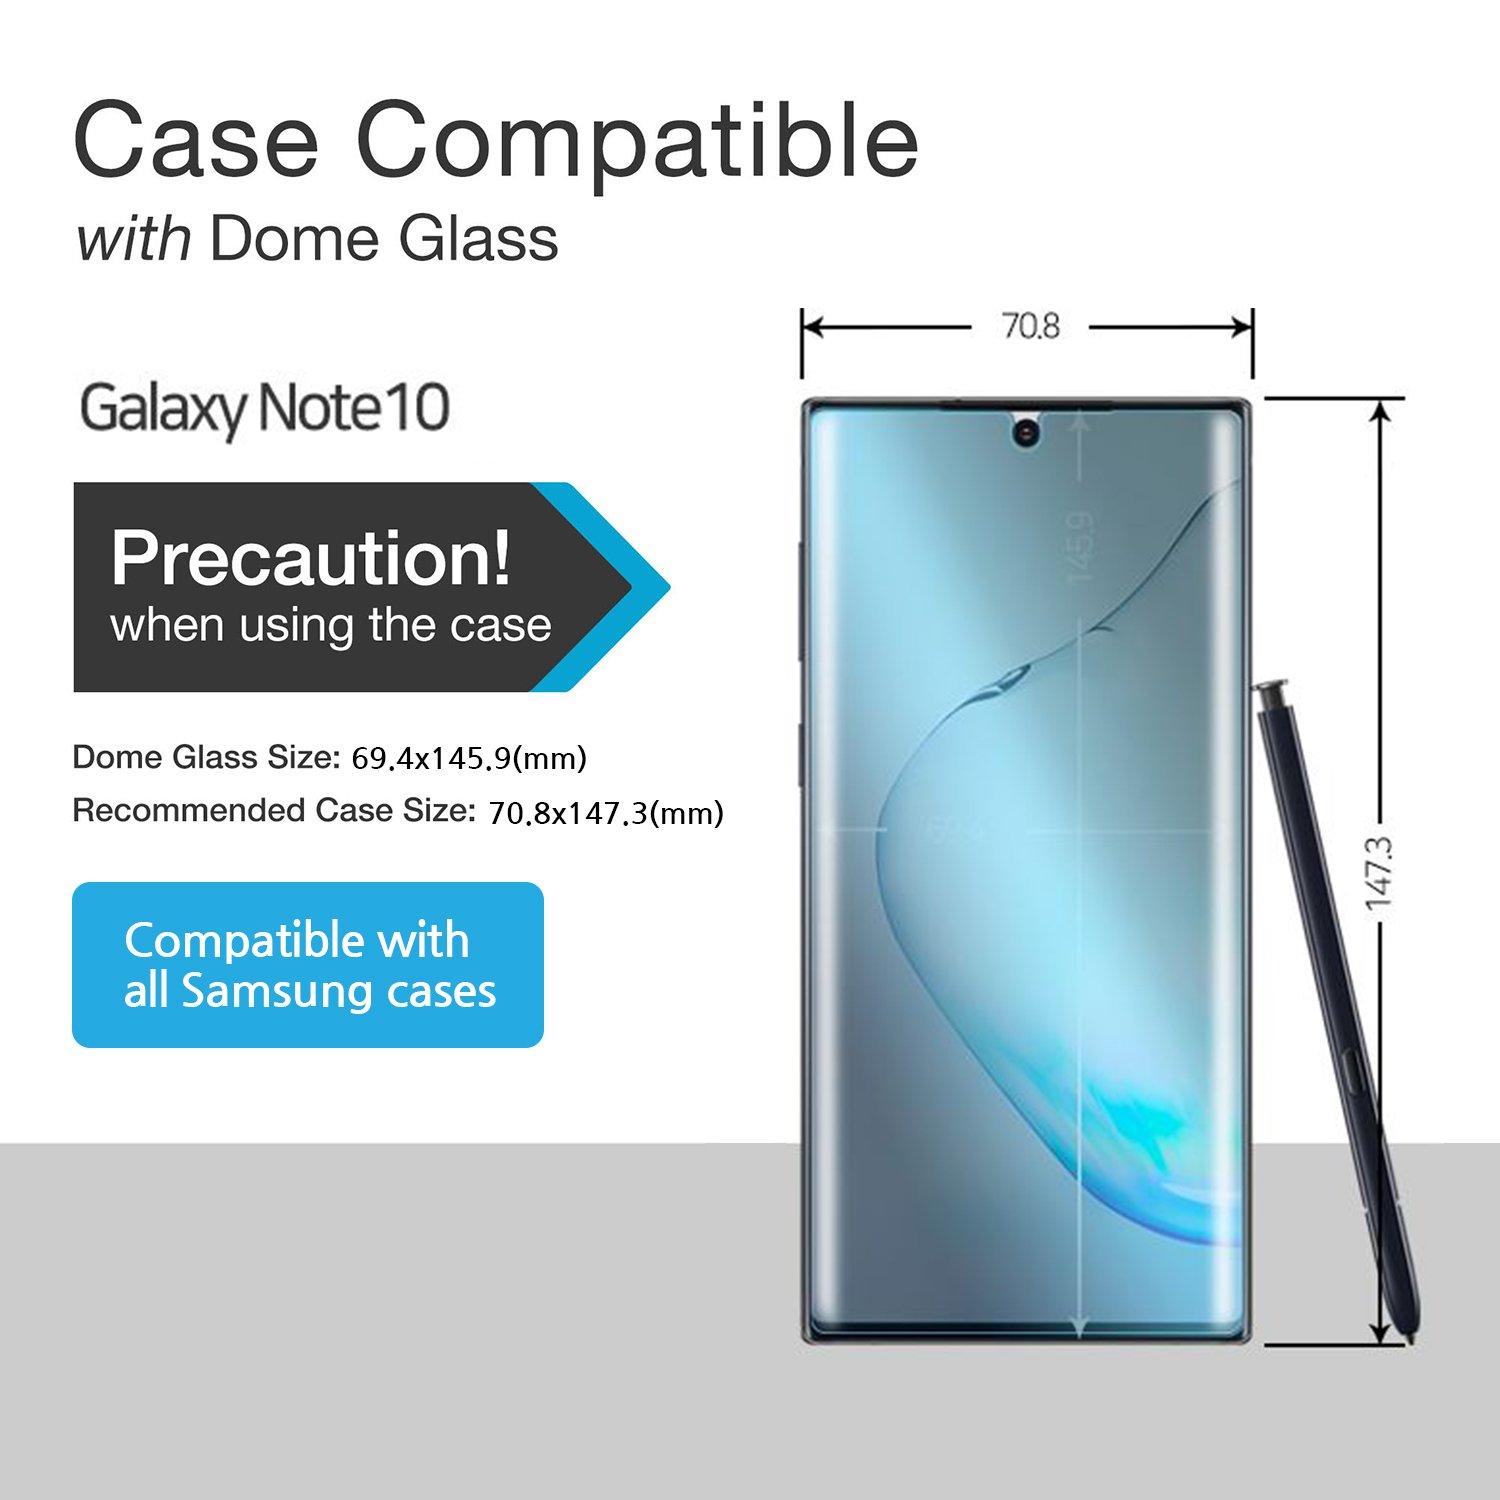 Samsung Galaxy Note 10 Dome Glass Screen Protector